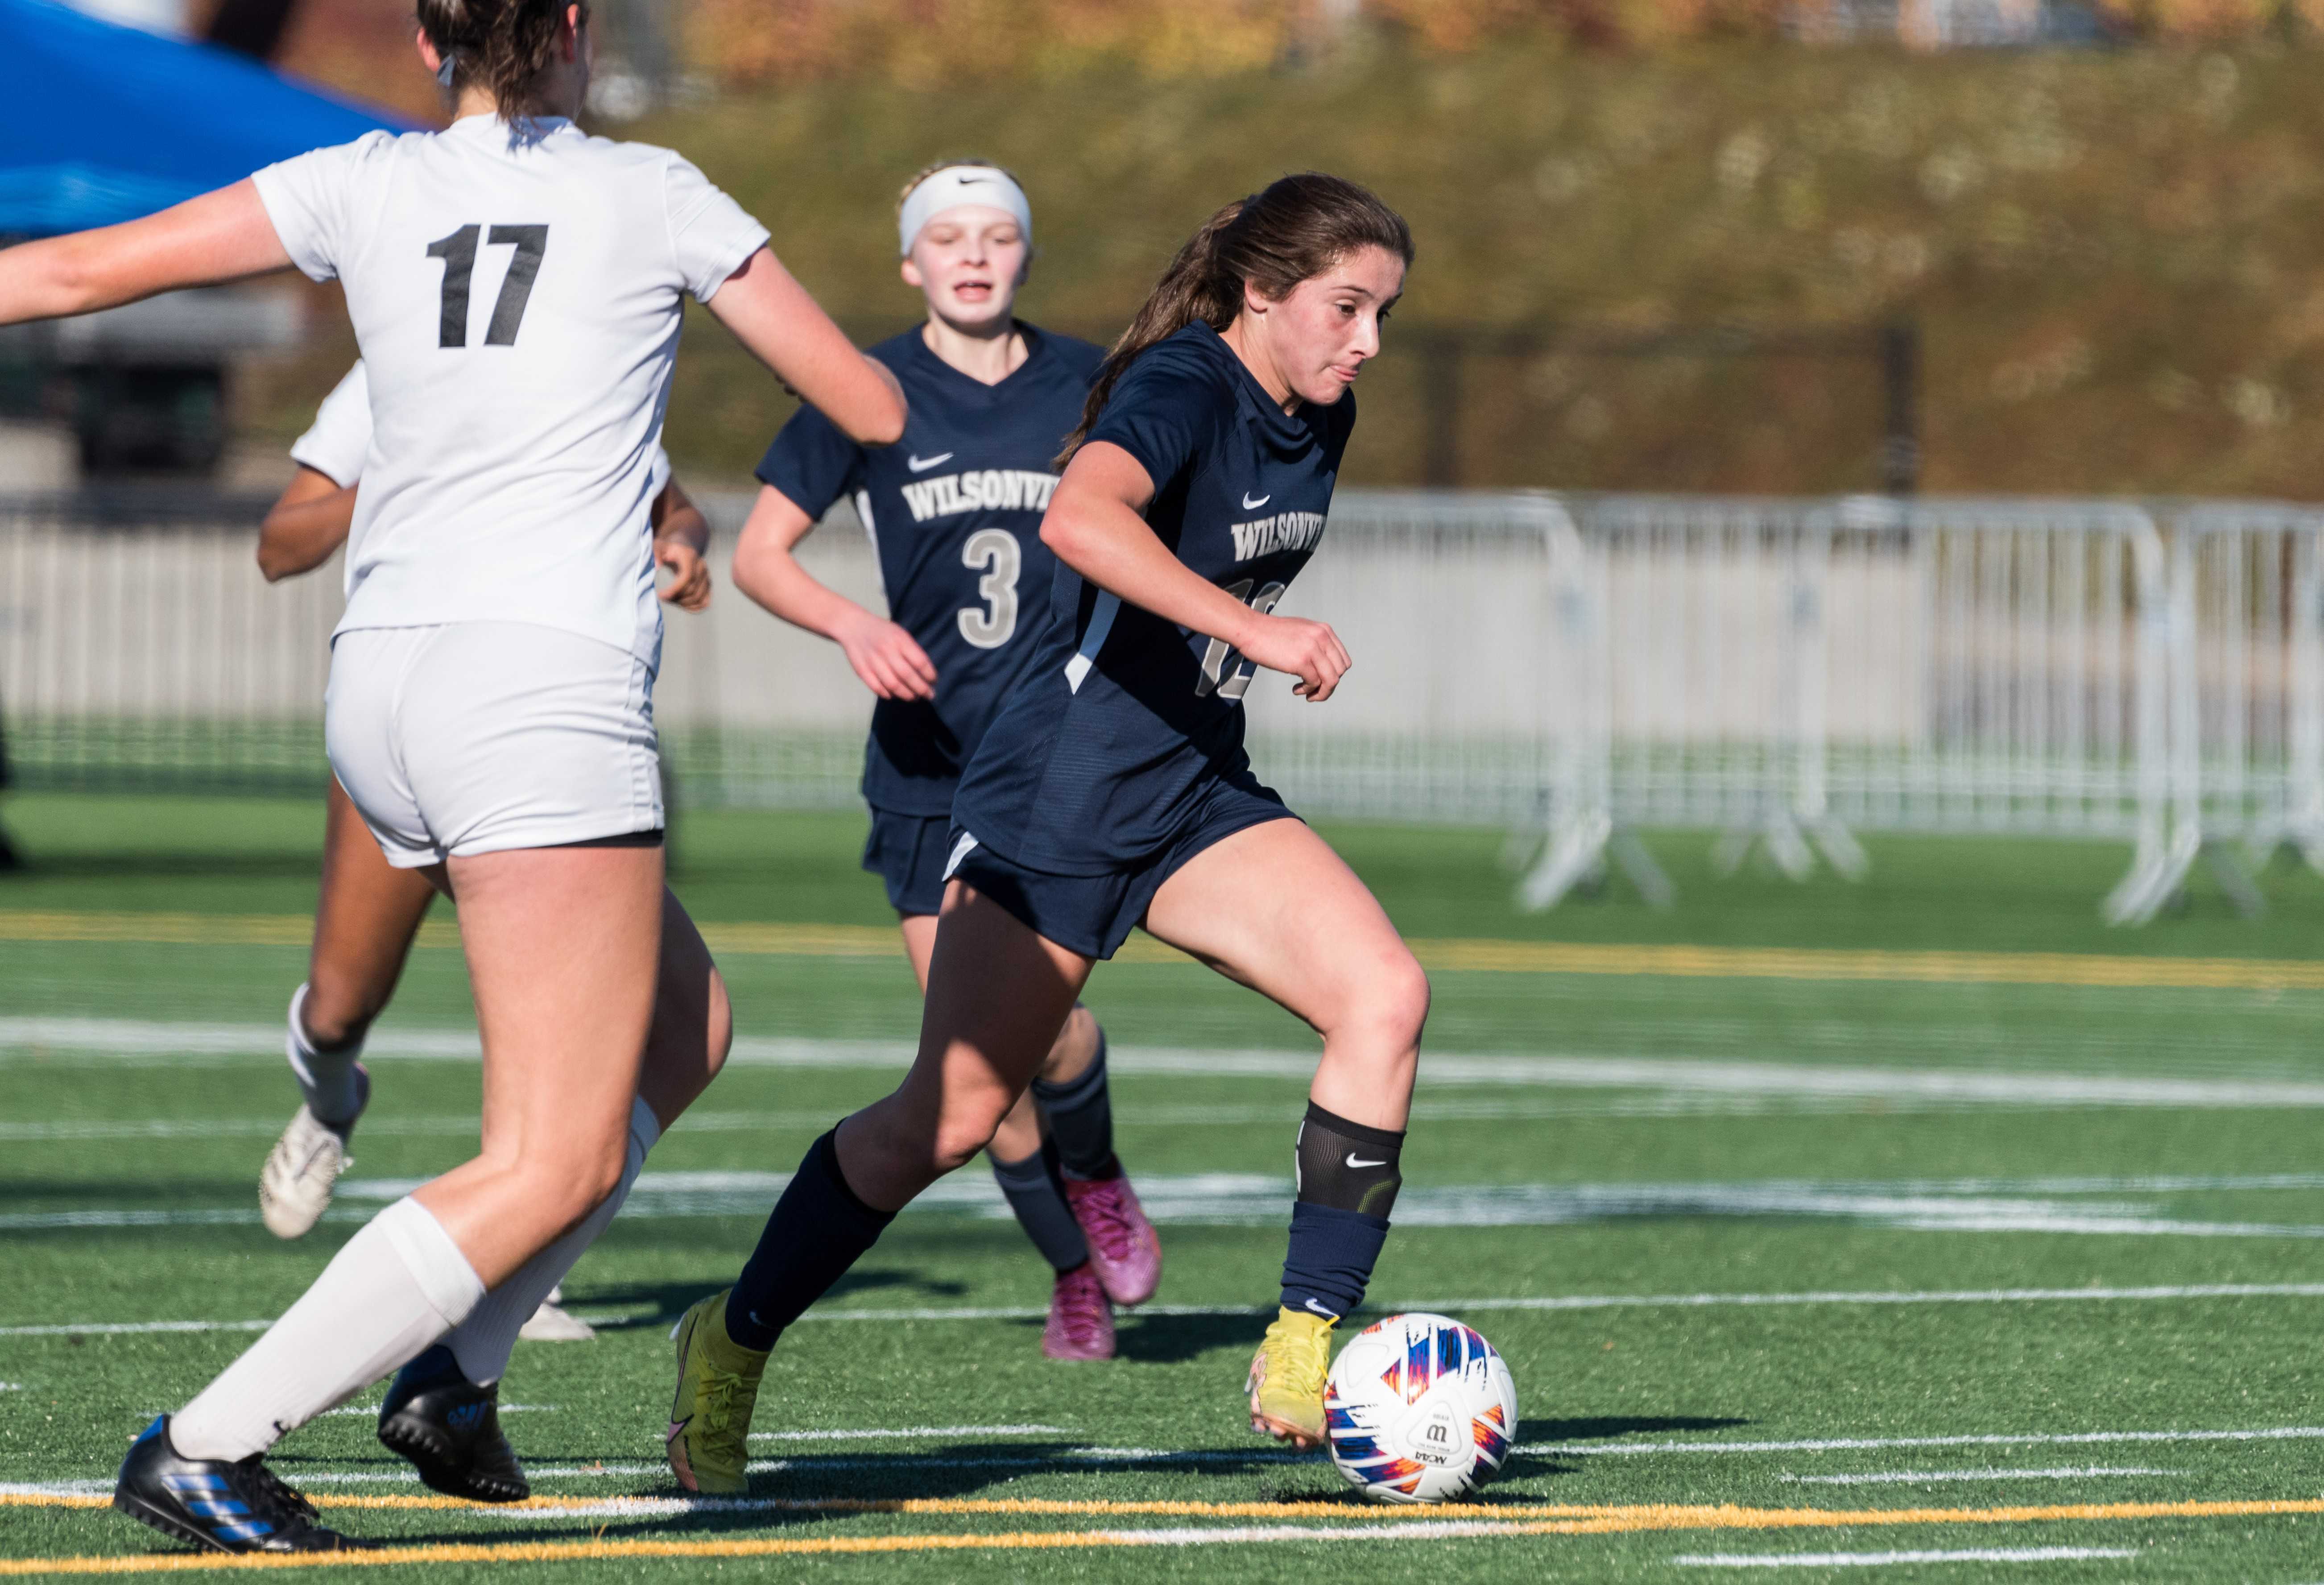 Midfielder Kenley Whittaker led Wilsonville with 23 goals and eight assists as a junior last season. (Photo by Greg Artman)